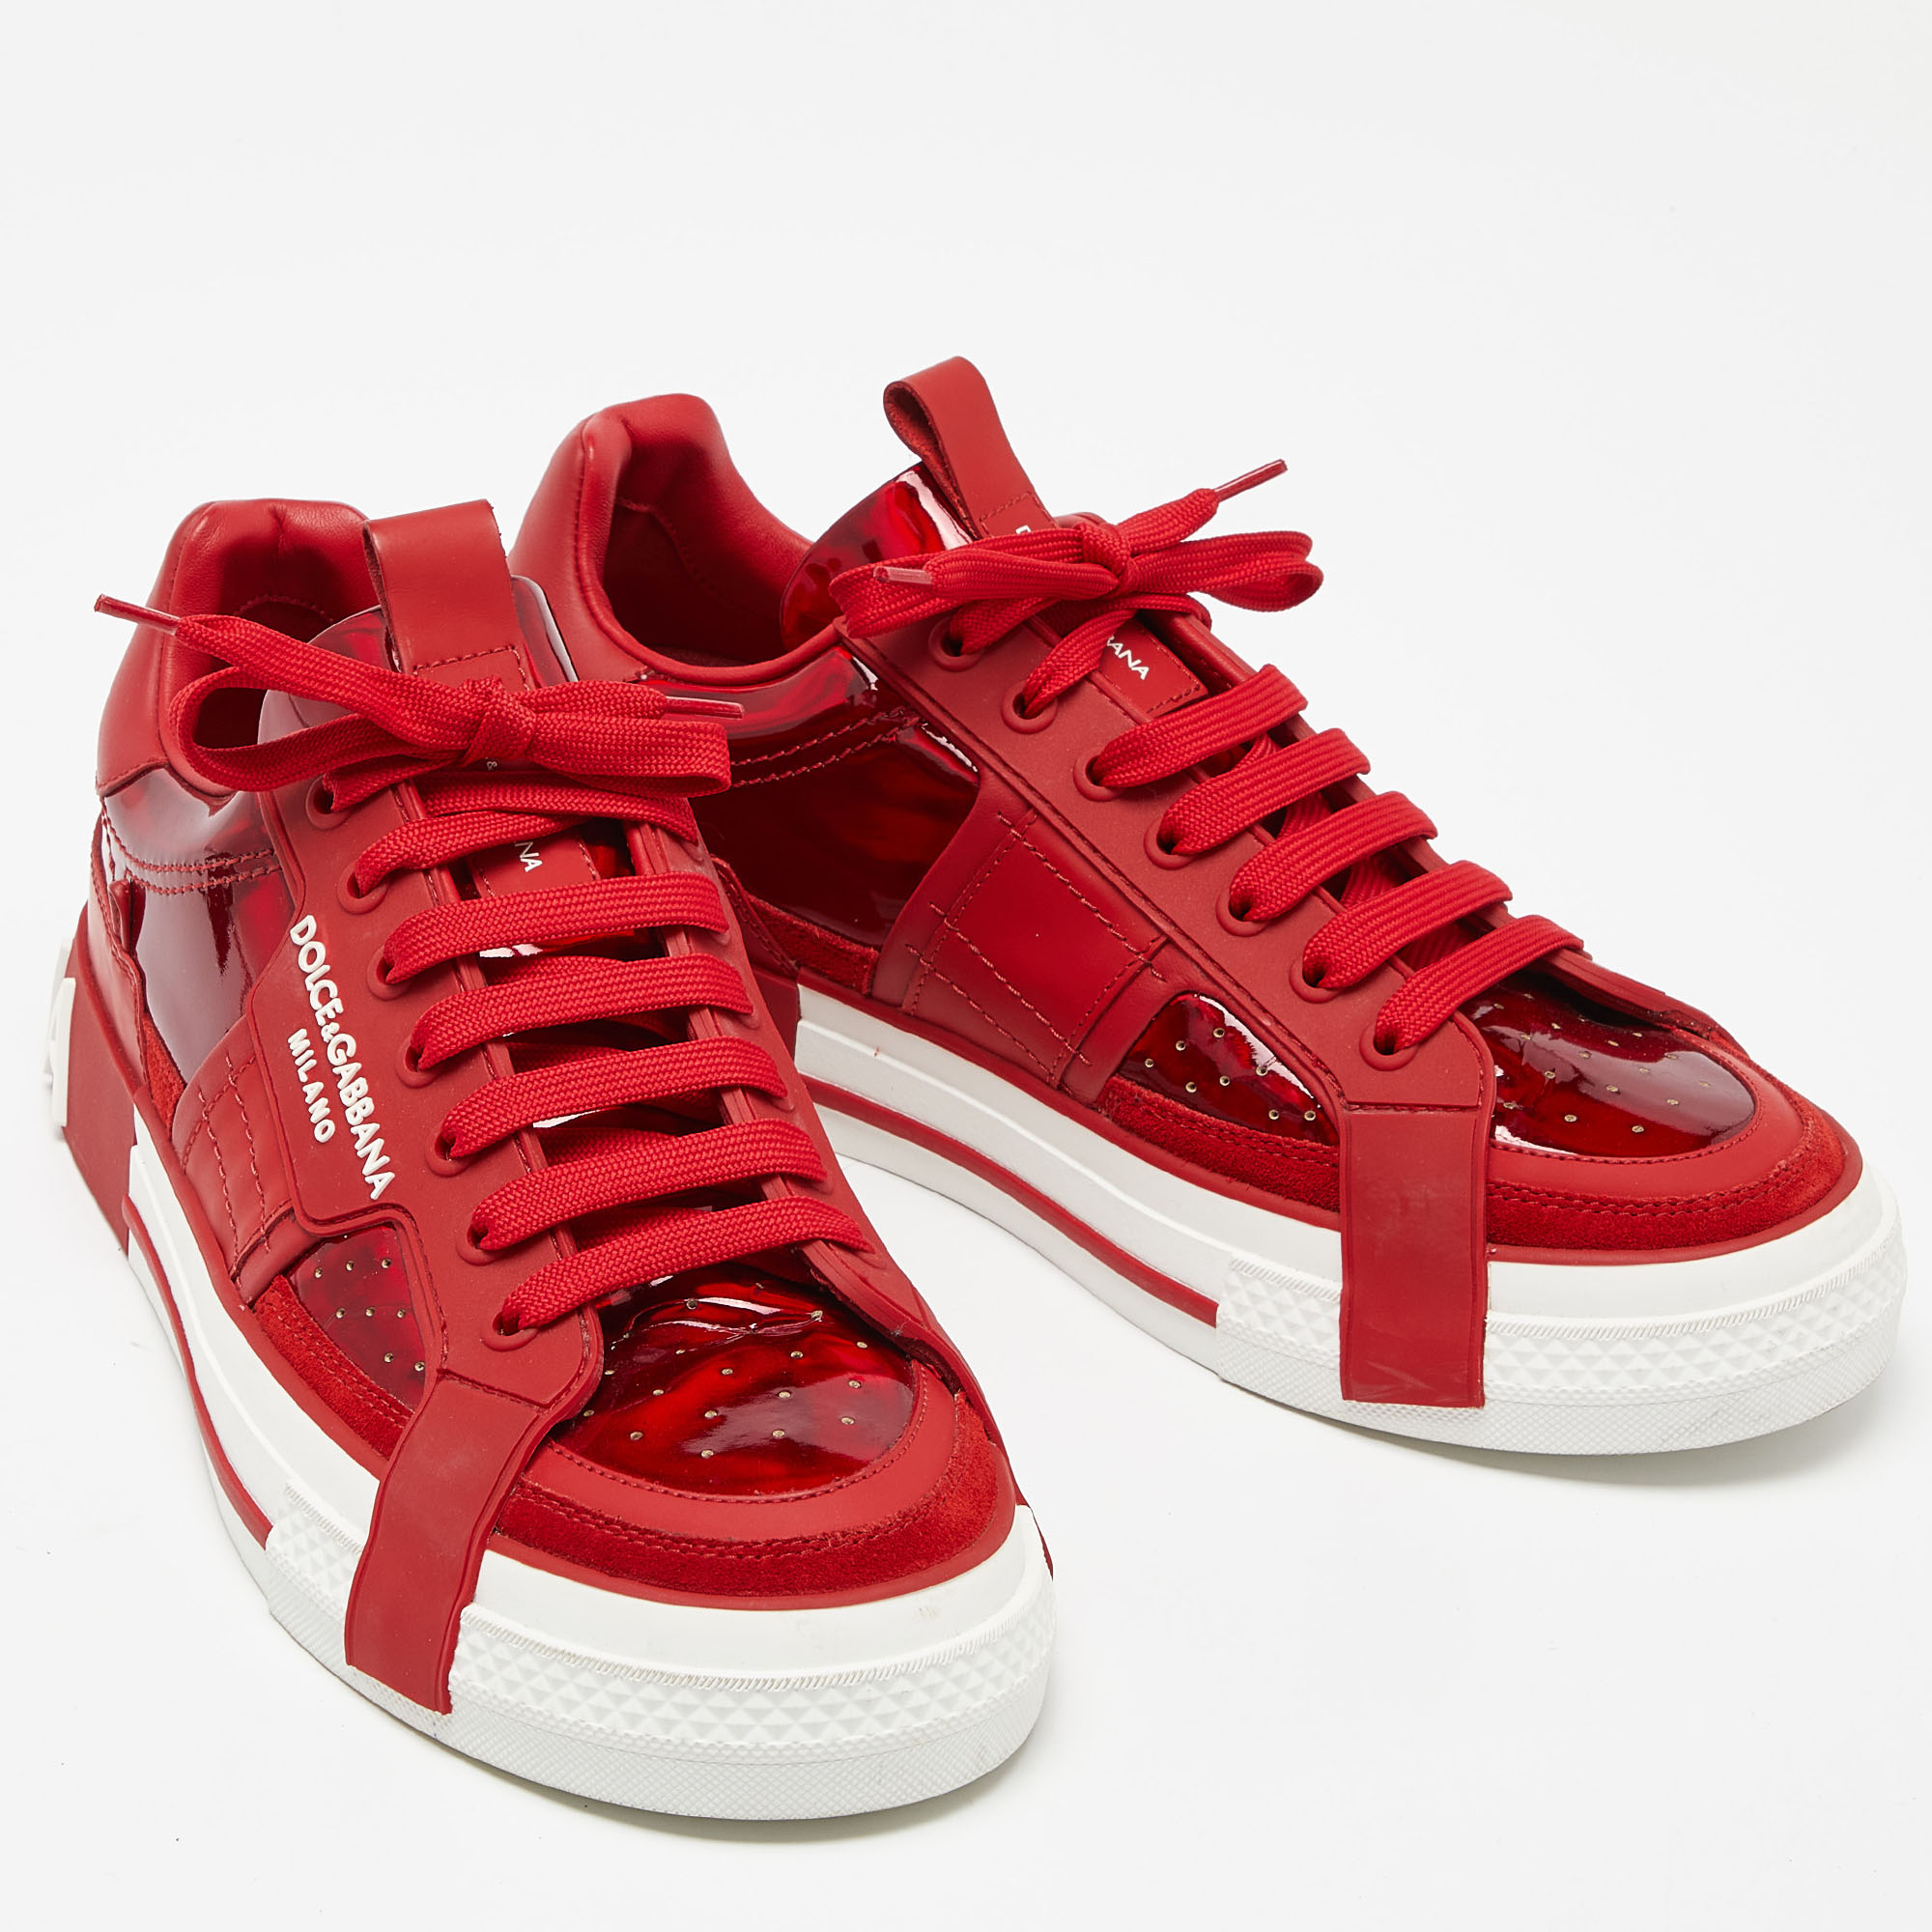 Dolce & Gabbana Red Leather And PVC Custom 2.Zero Sneakers Size 42.5